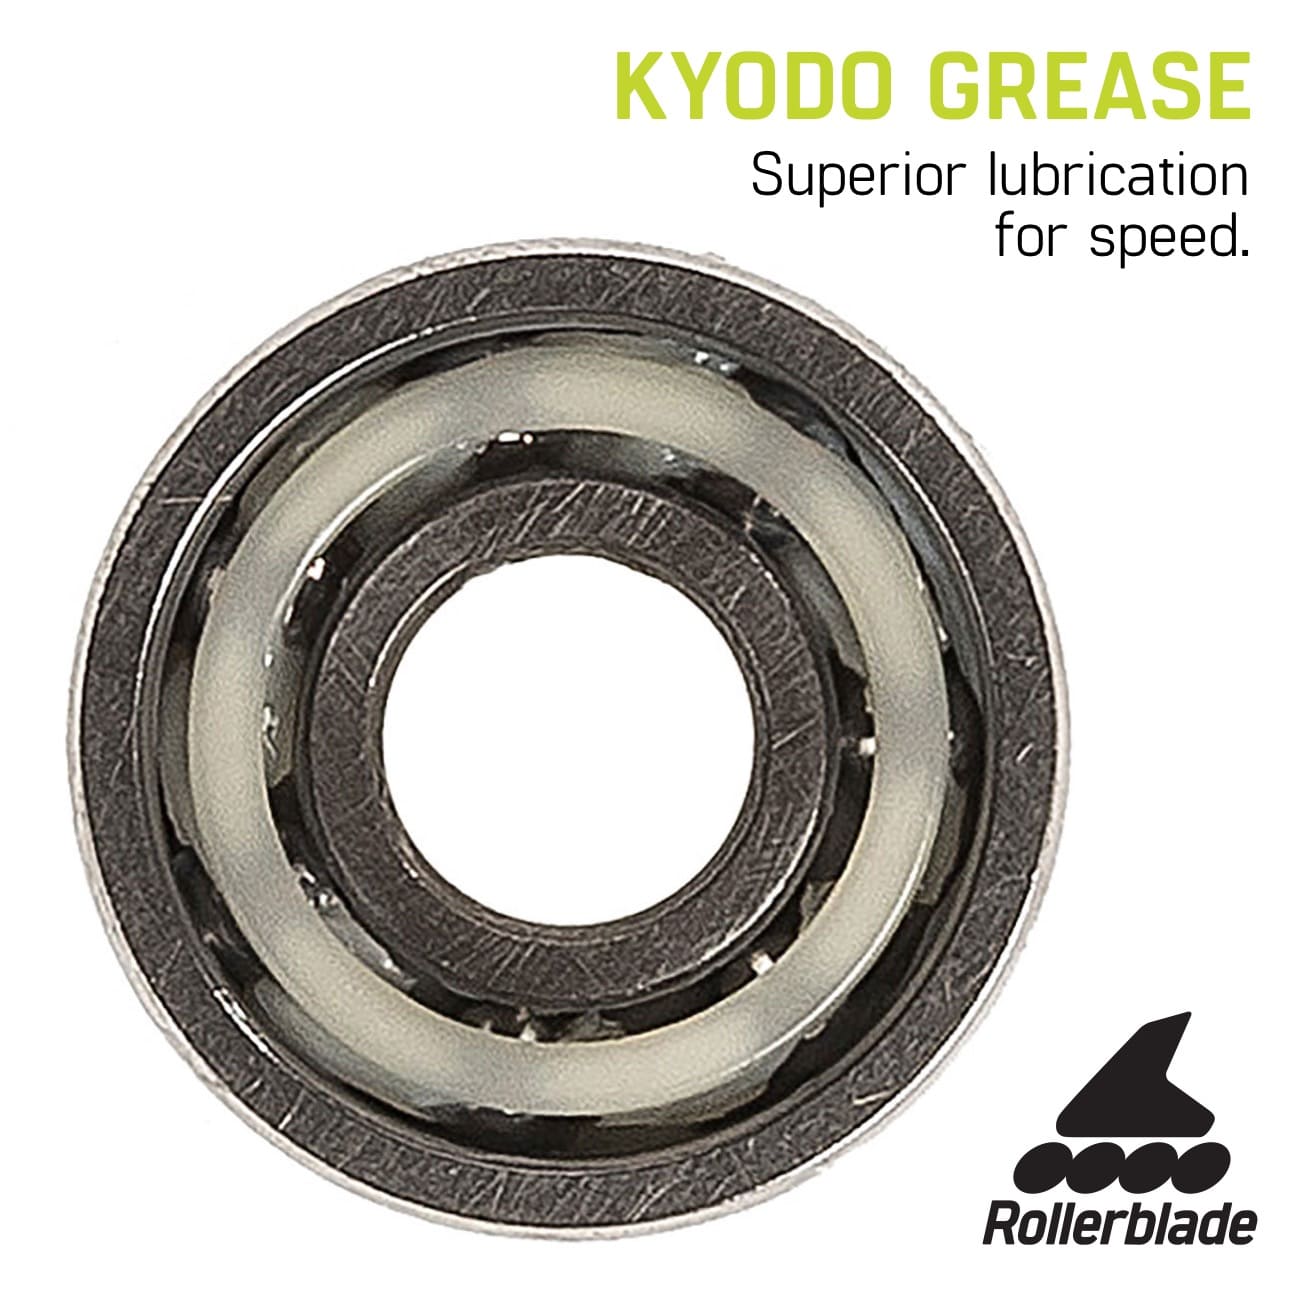 bearings-with-kyodo-grease